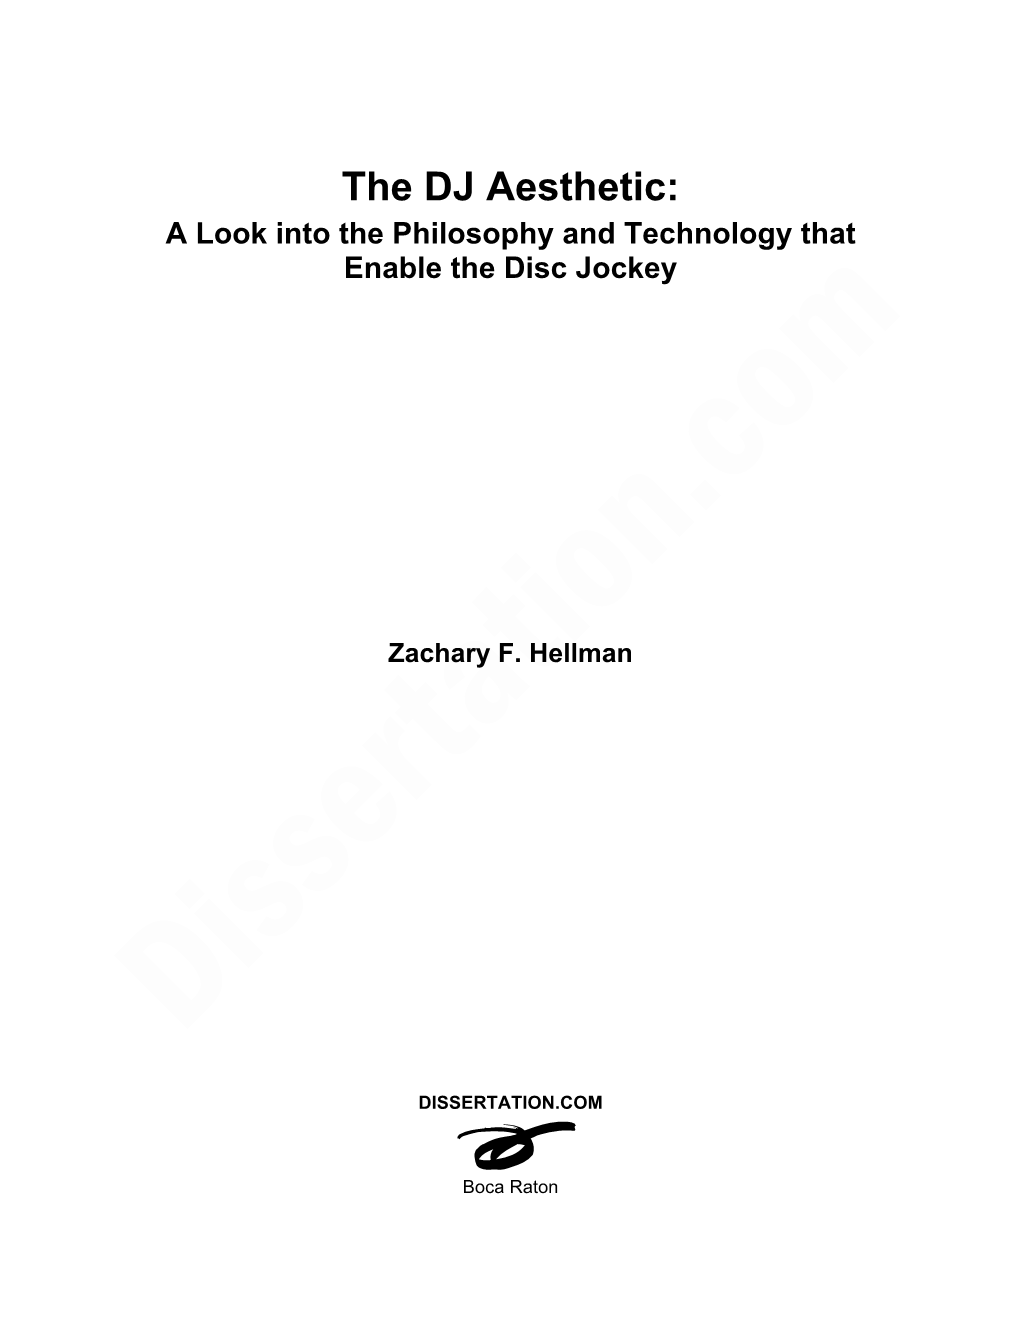 The DJ Aesthetic: a Look Into the Philosophy and Technology That Enable the Disc Jockey